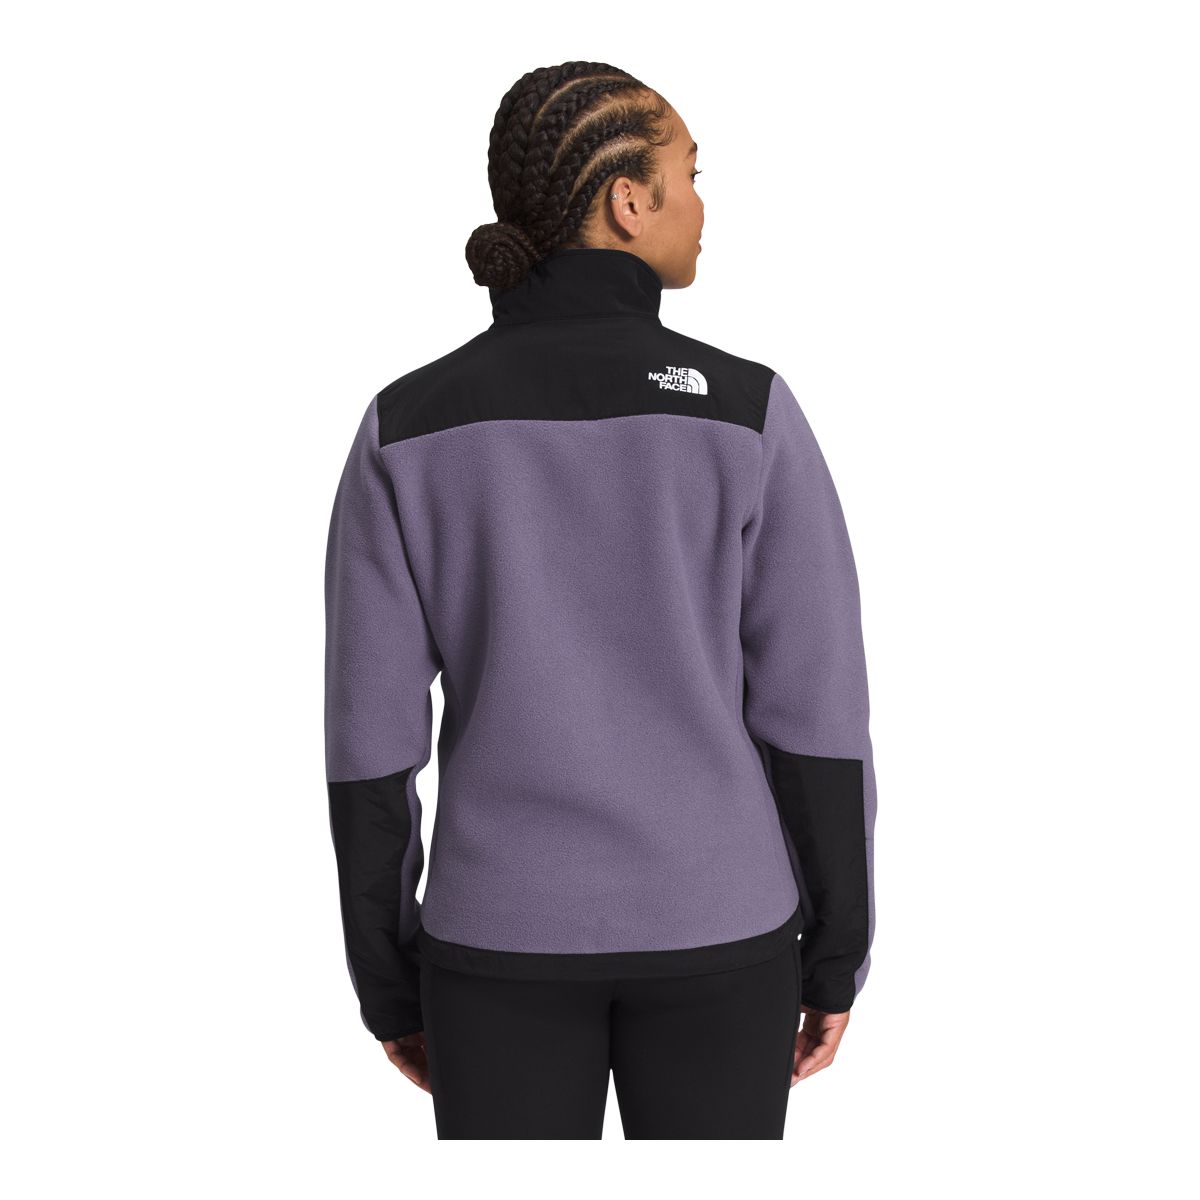  North Face Denali Women: Clothing, Shoes & Jewelry